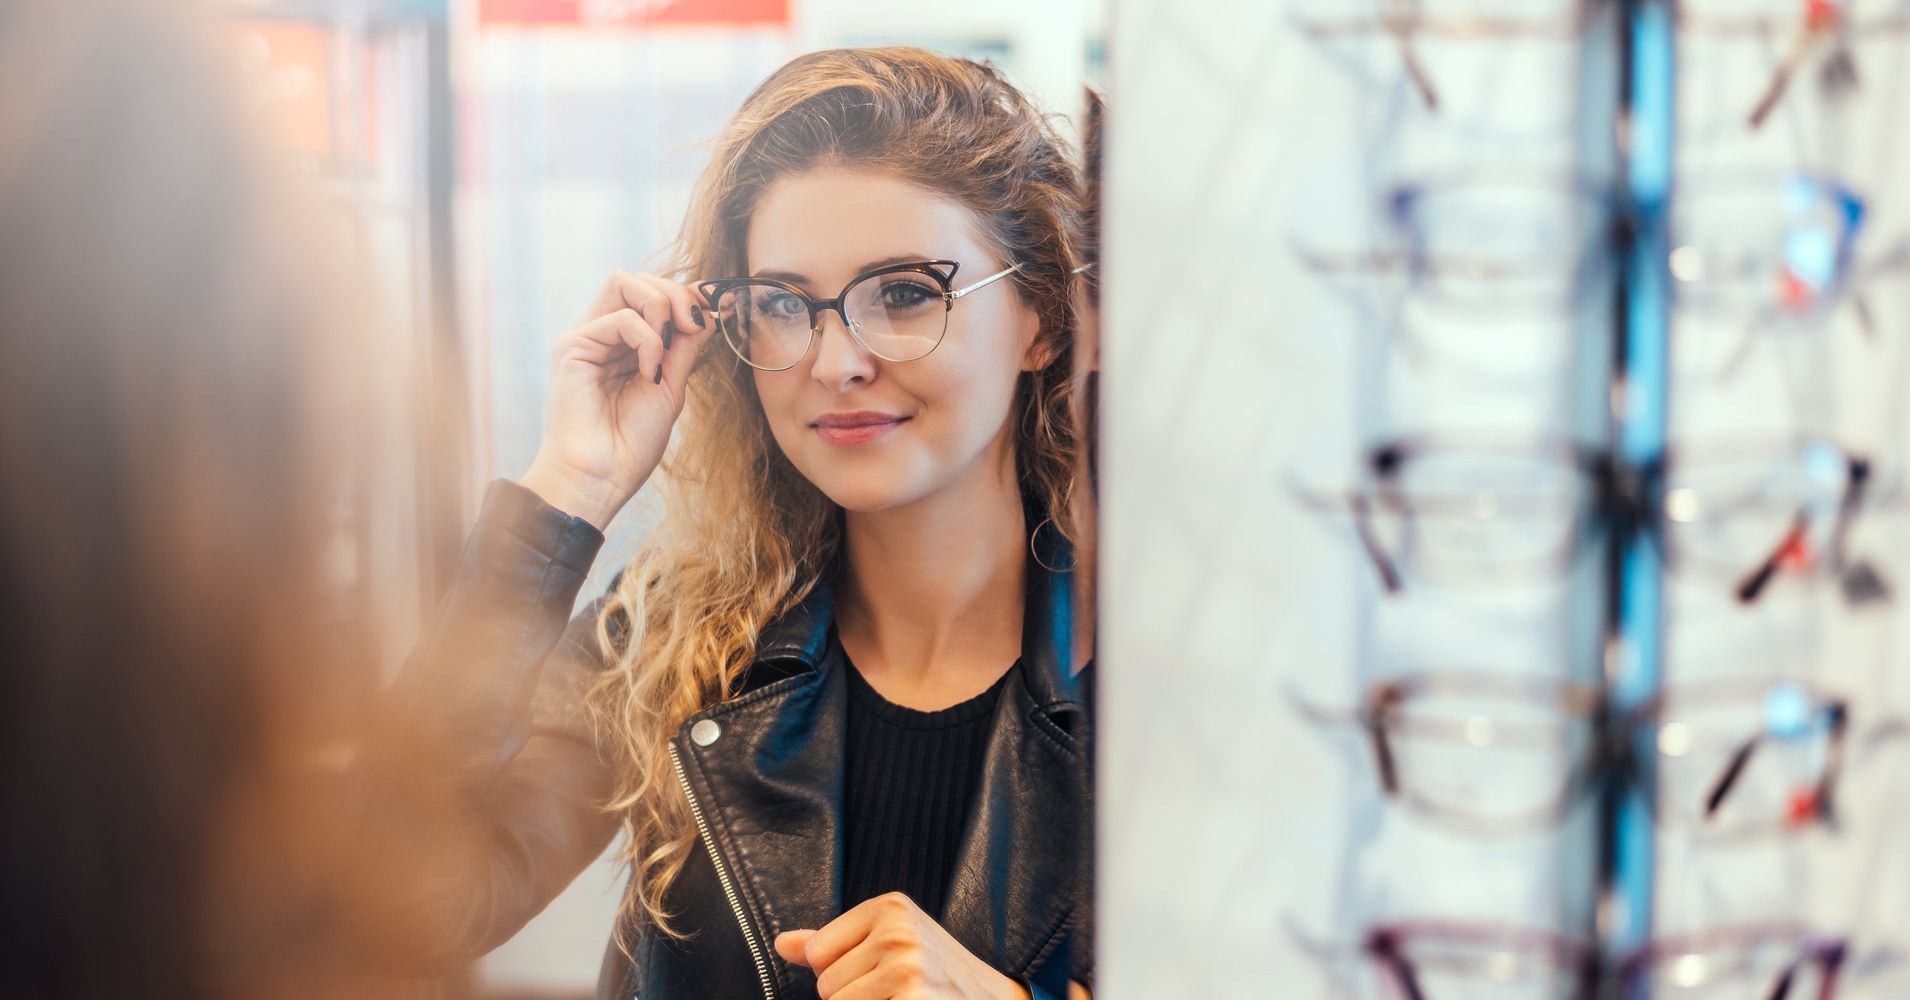 7 Of The Best Places To Buy Glasses Online For Cheap | HuffPost